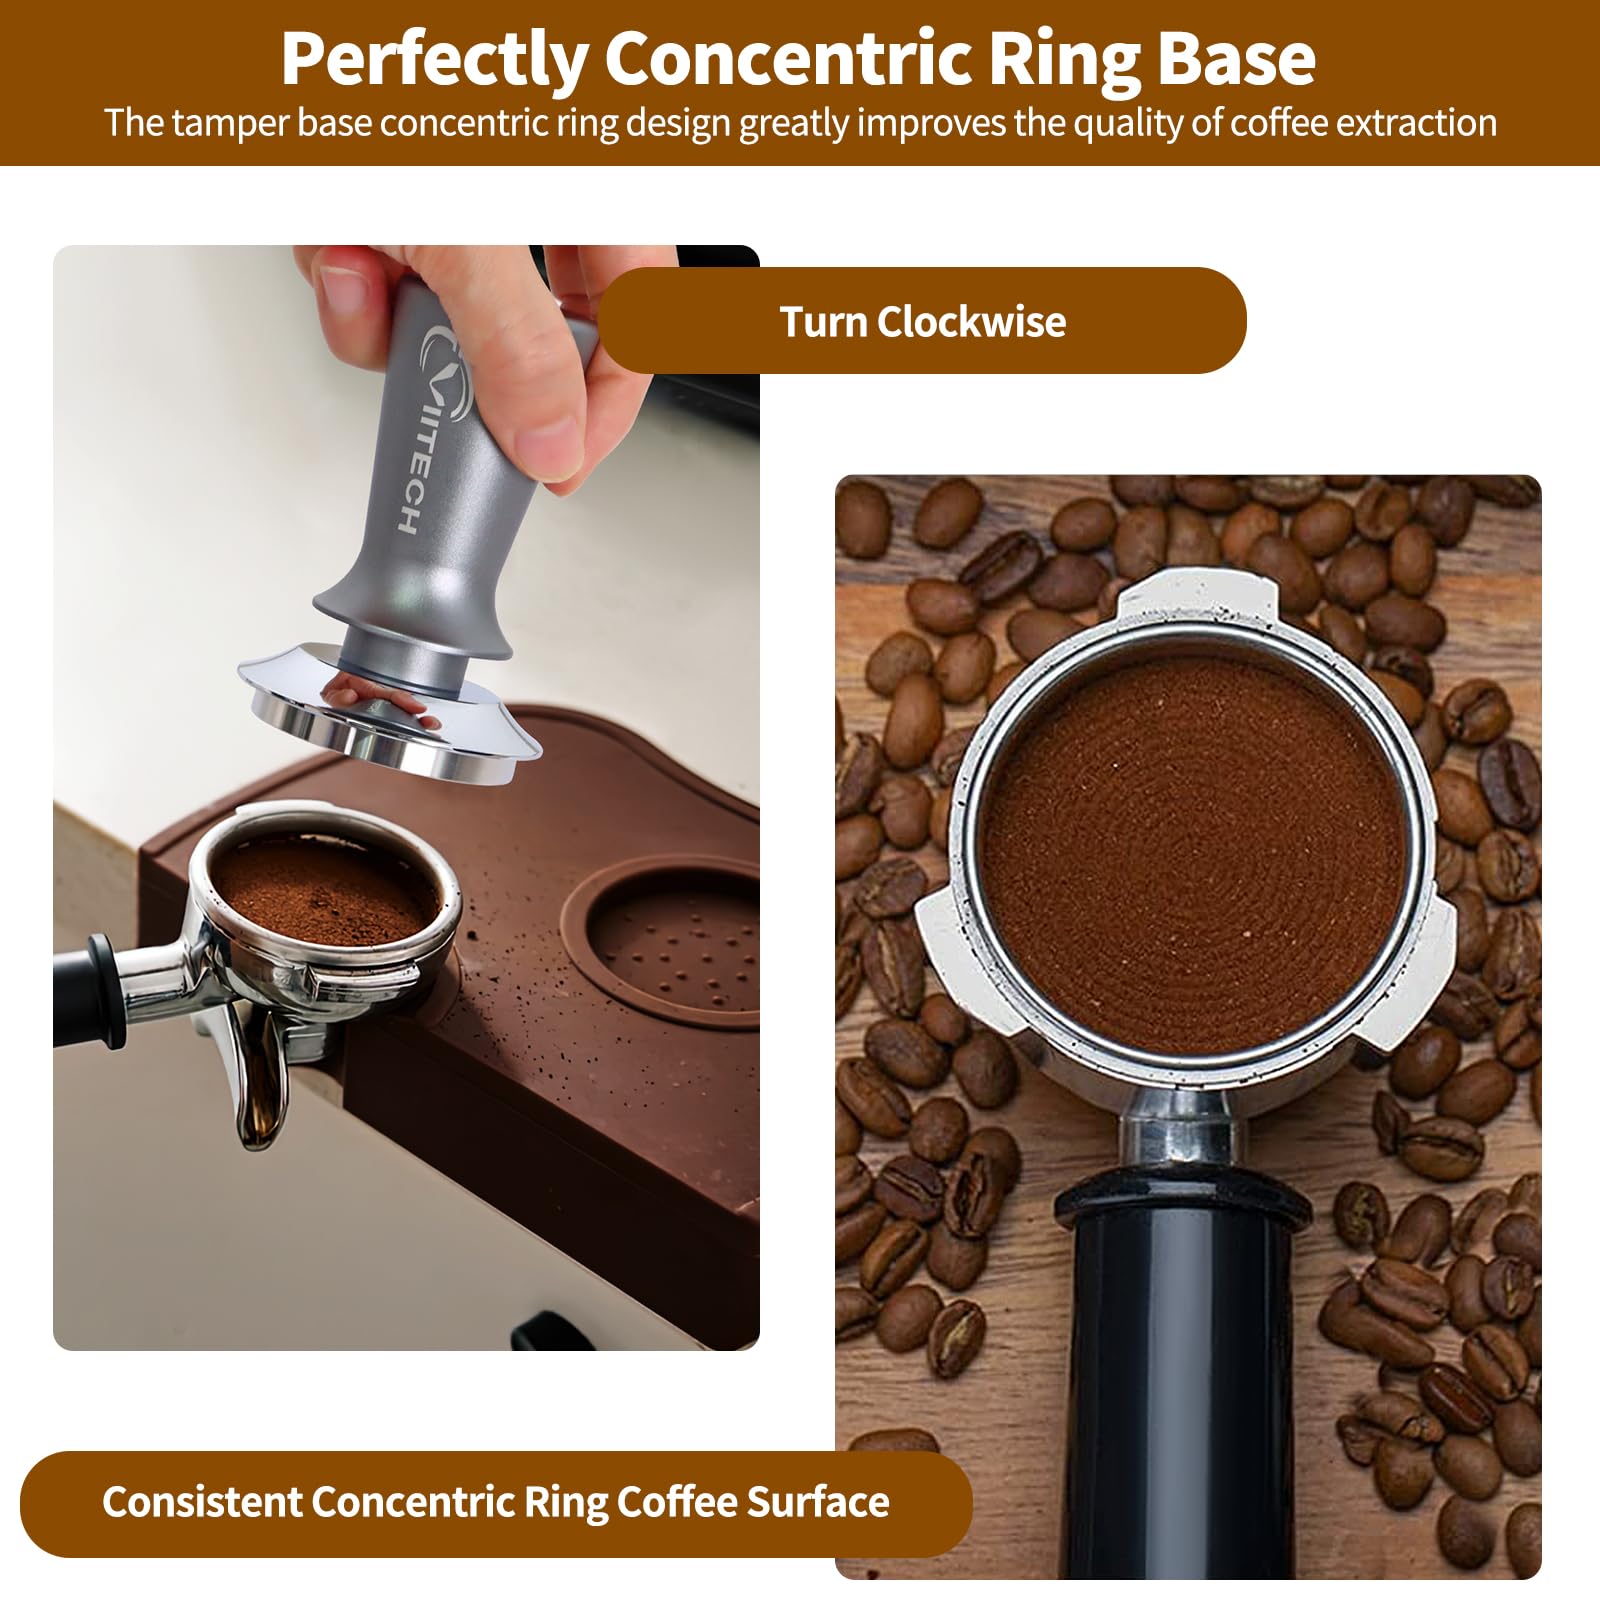 Espresso Tamper, Viitech 58mm Coffee Tamper for Espresso Machine, Premium Calibrated Tamper with Spring Loaded, Stainless Steel Flat Ripple Base, Constant 30lb Hand Tamper Tools for Home Barista